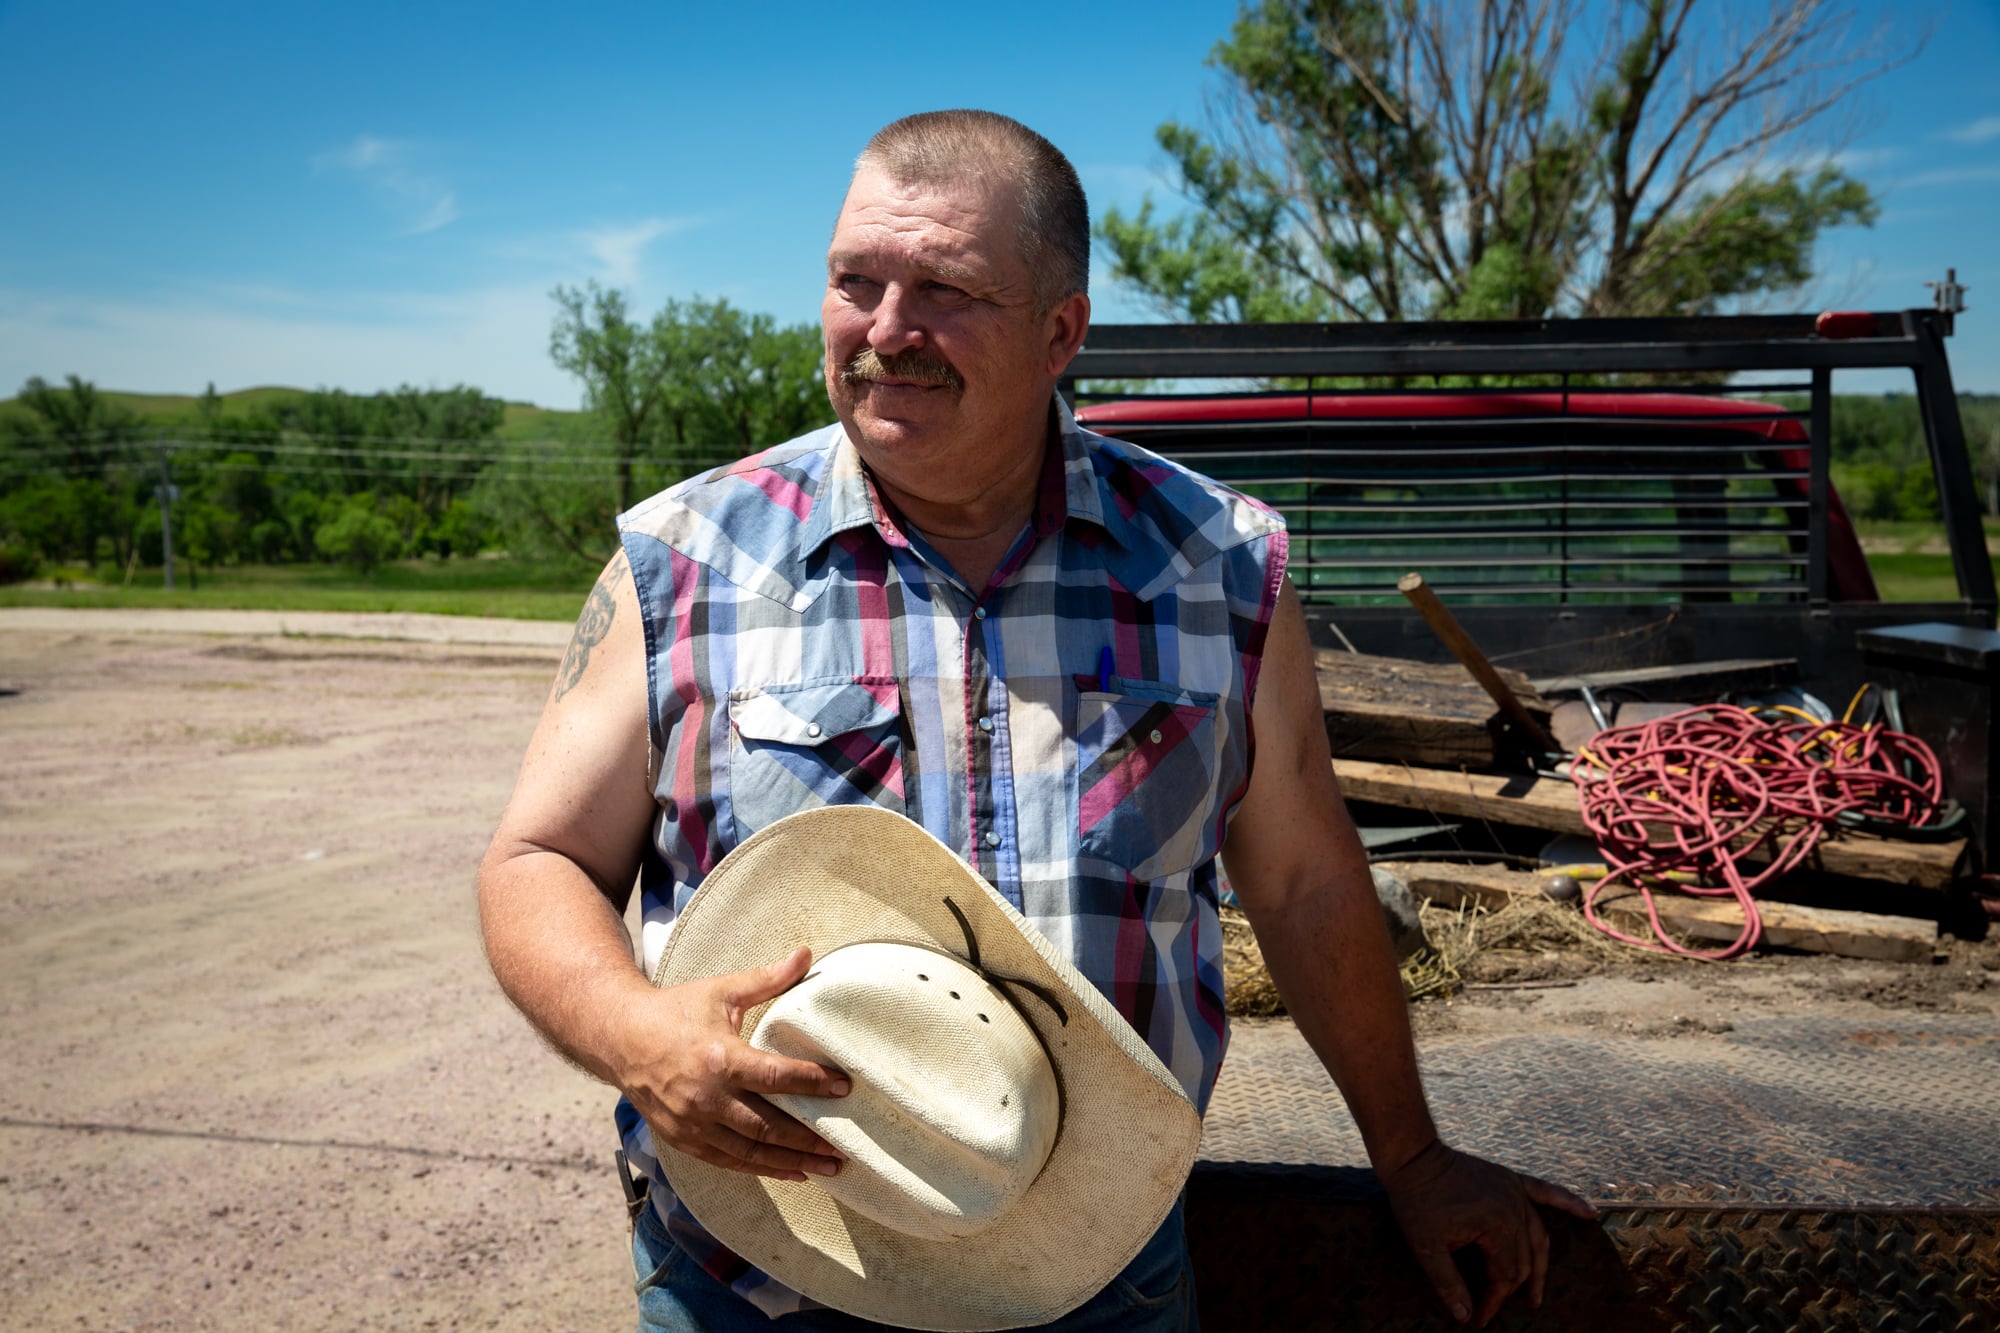 Mike Crosley is land manager on the Santee Sioux Reservation in Nebraska, which borders the Missouri River. His house was destroyed by flooding in March, but his history with the land makes him committed to staying. “I'm not going to leave here. I am going to build a house in a better location. But I would never leave here.” (Anya Magnuson/News21)